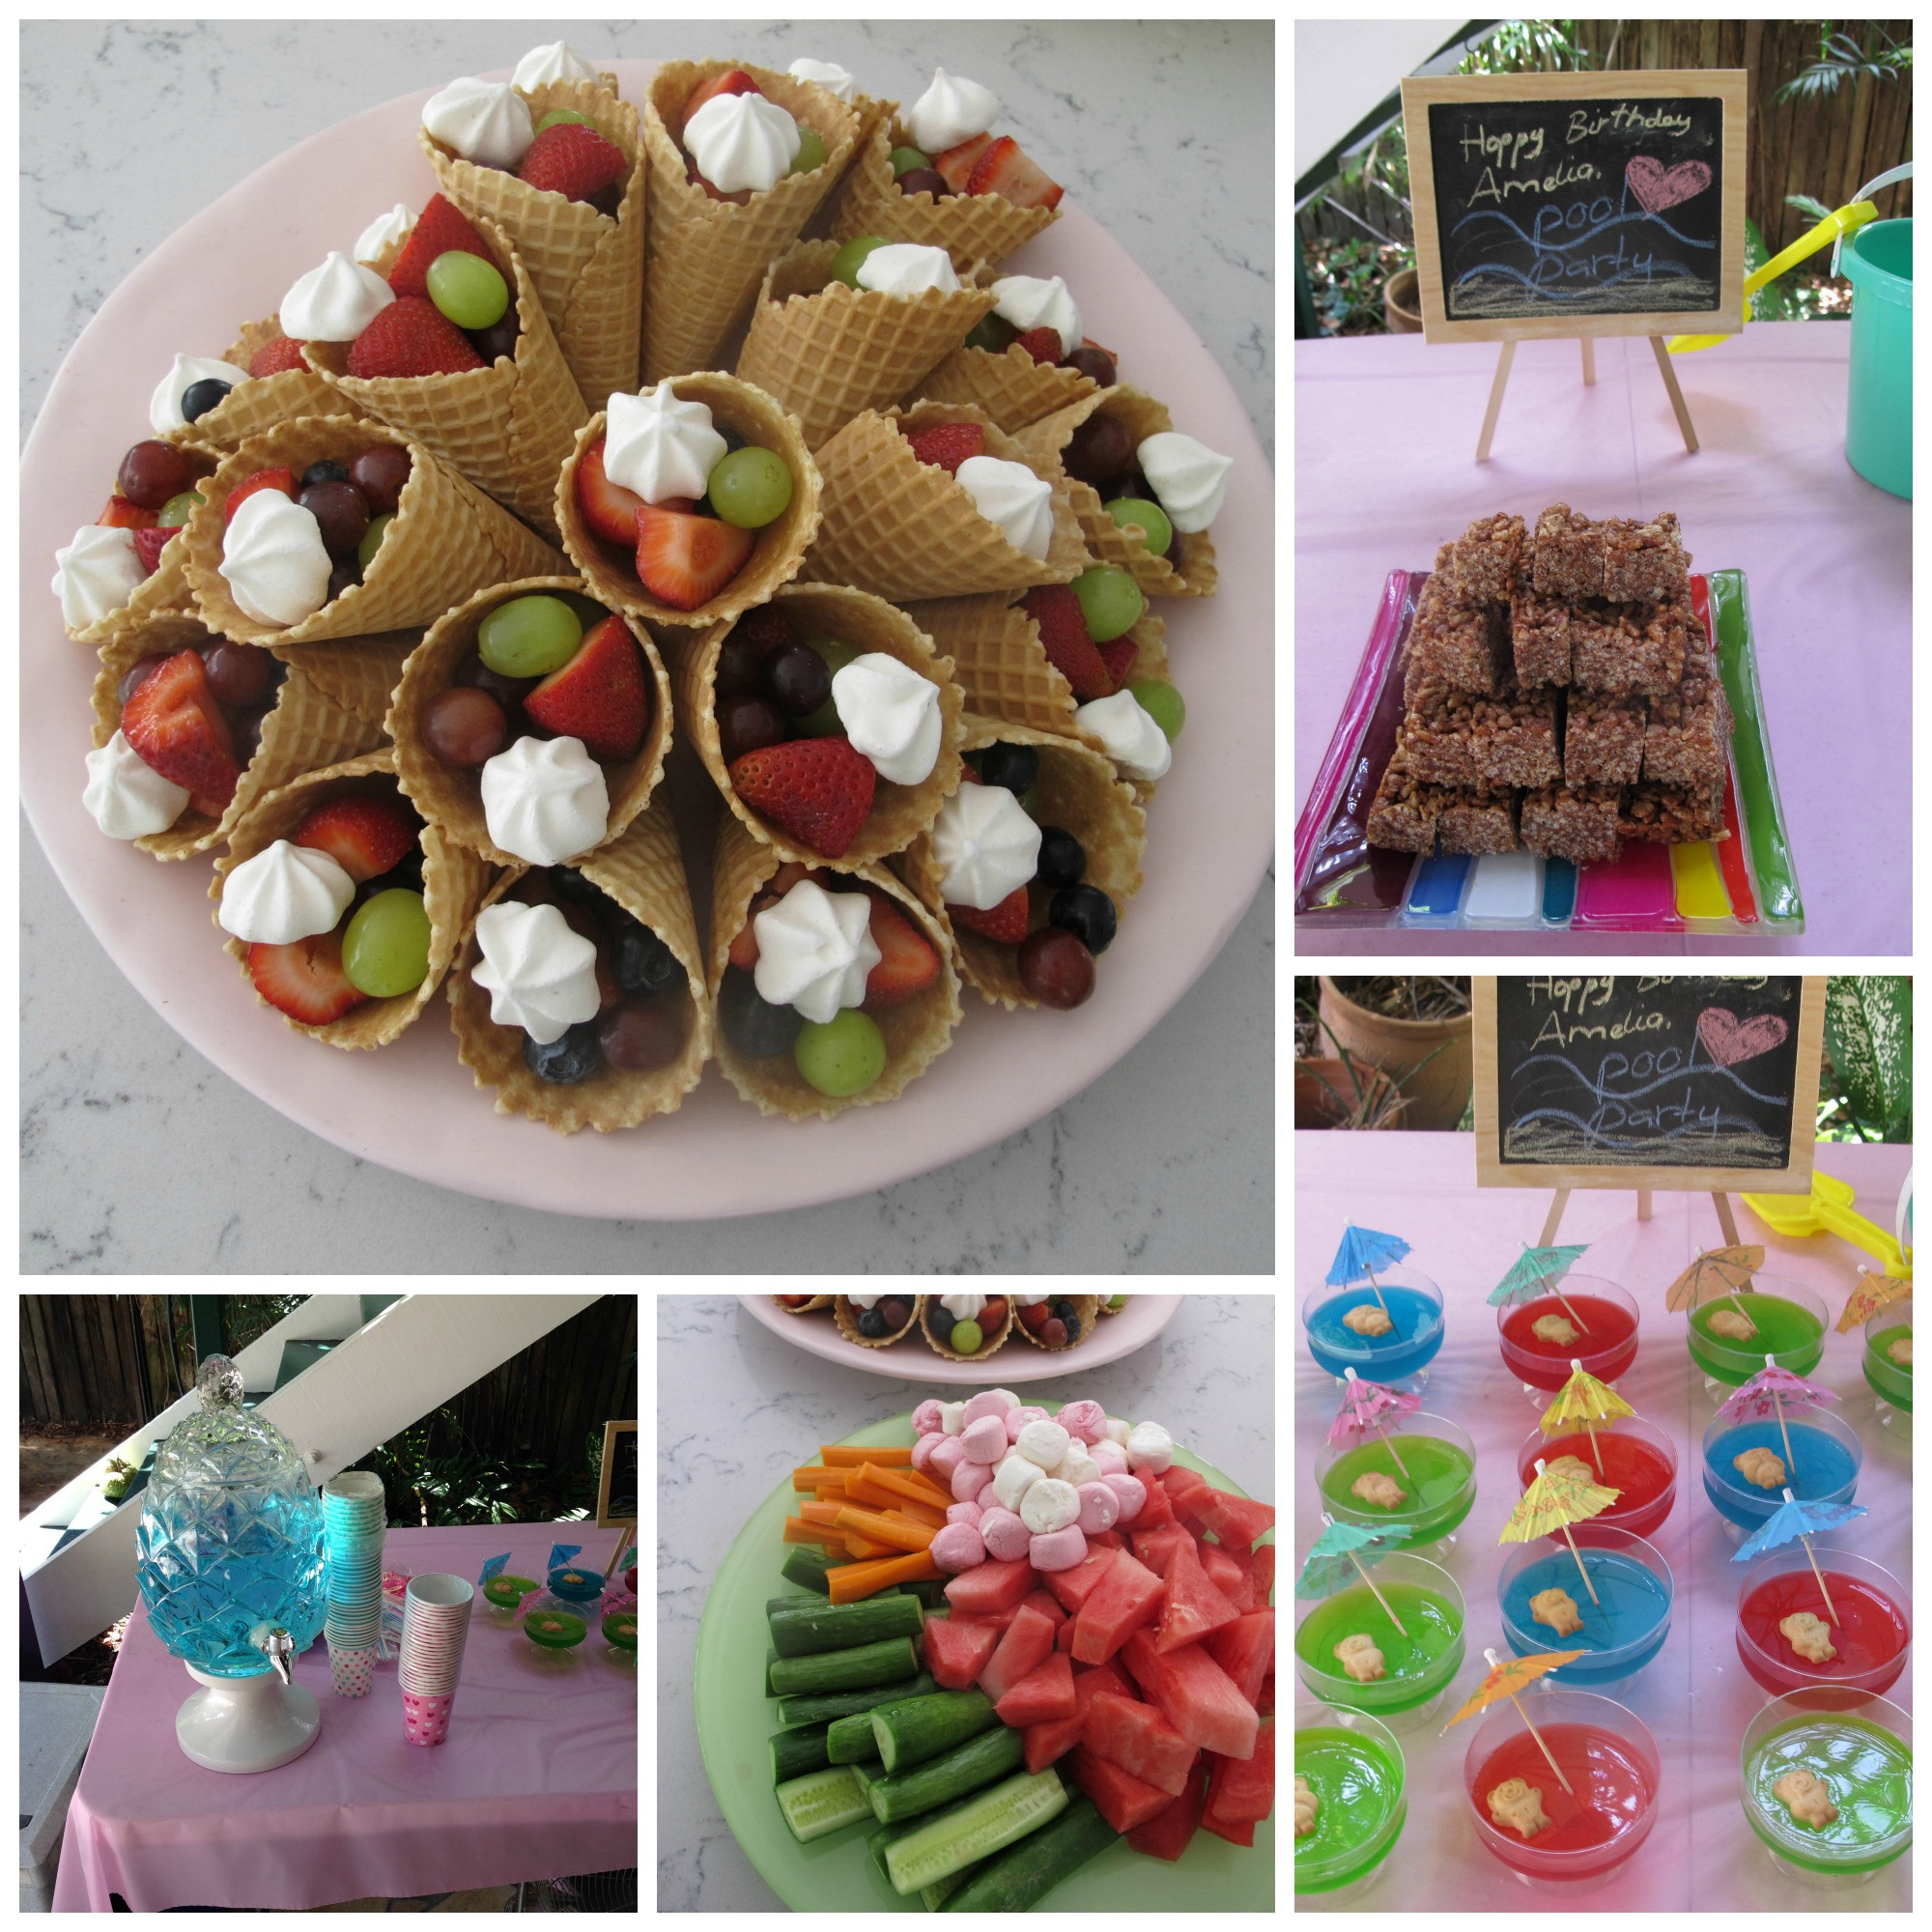 Pool Party Food Ideas
 Birthday Pool Party Tips Tricks and Cake hint have